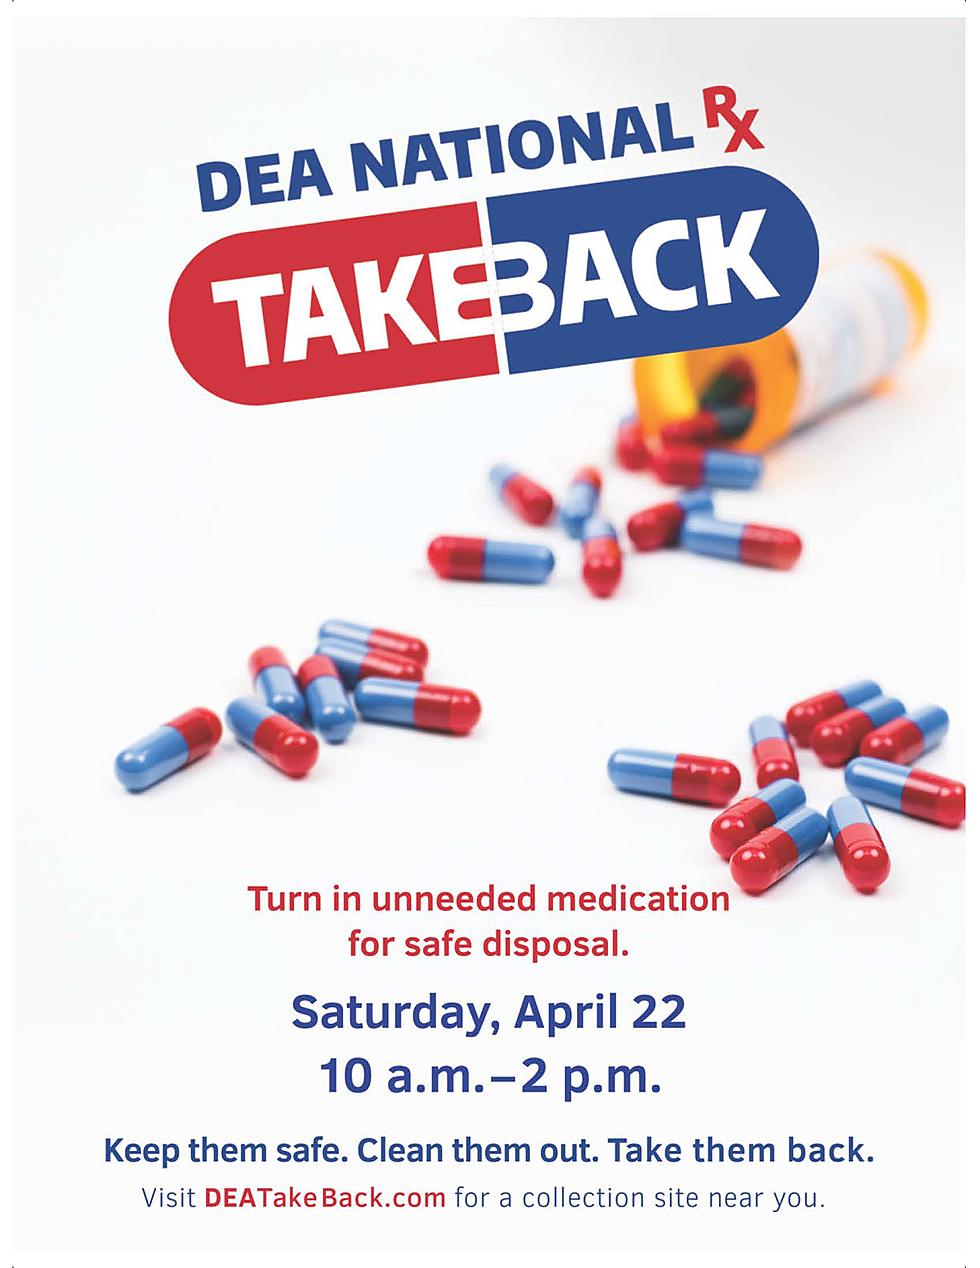 They Tried to Bring that?! What not to Bring to National Drug Take Back Day